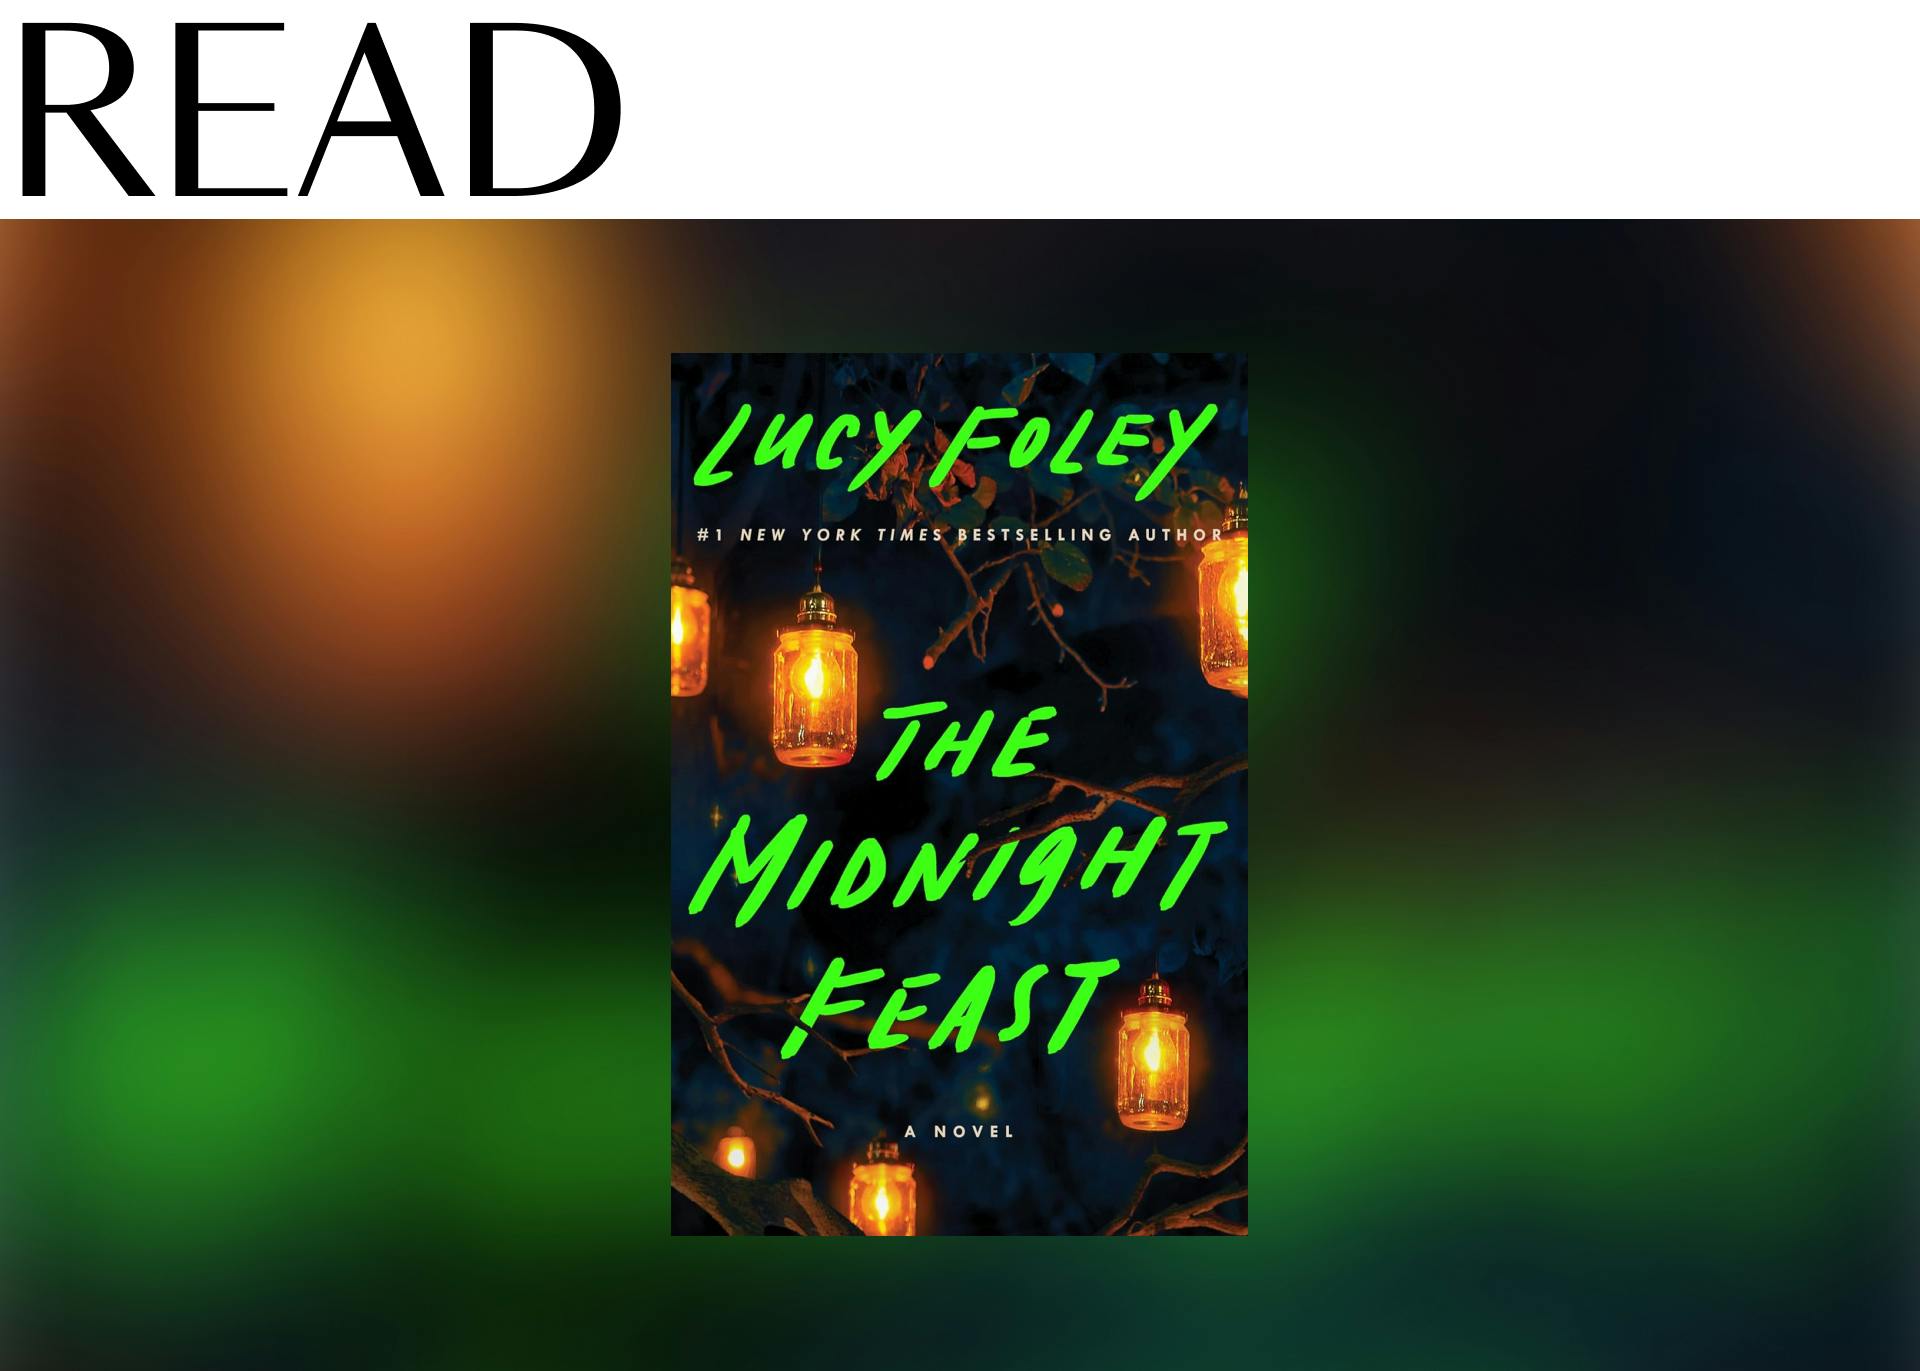 READ: “The Midnight Feast” by Lucy Foley